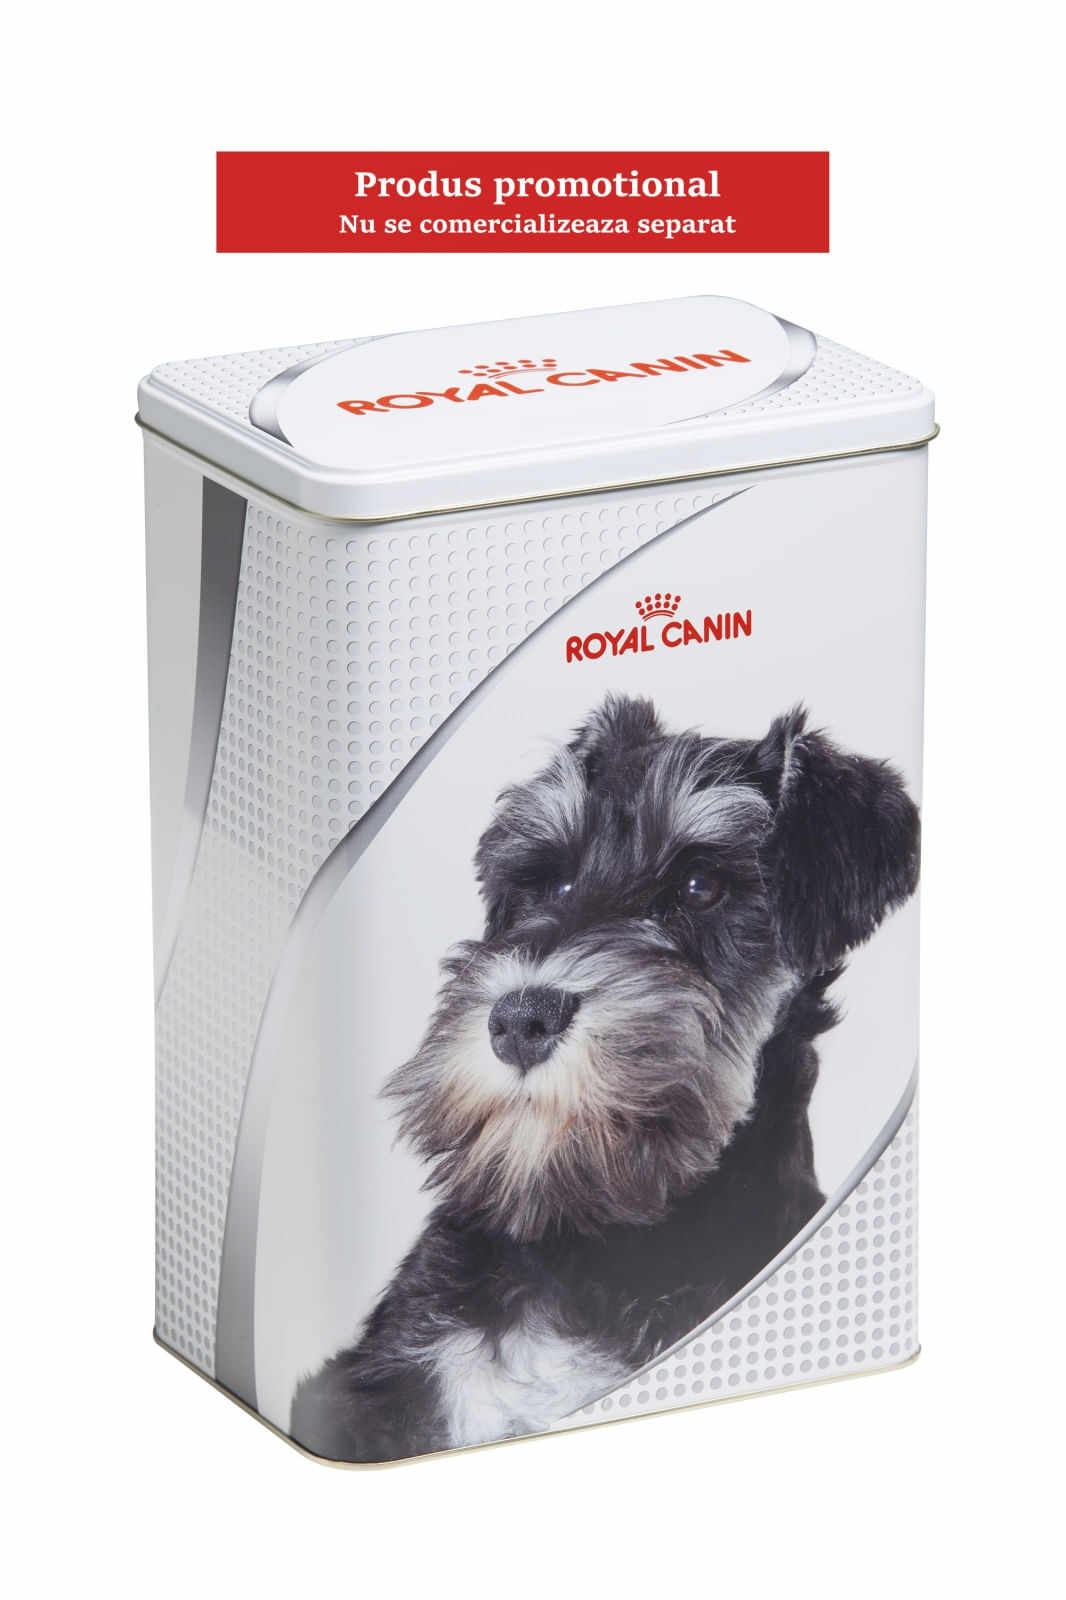 Royal Canin Cadou Container Metal DOG MINI 2 KG